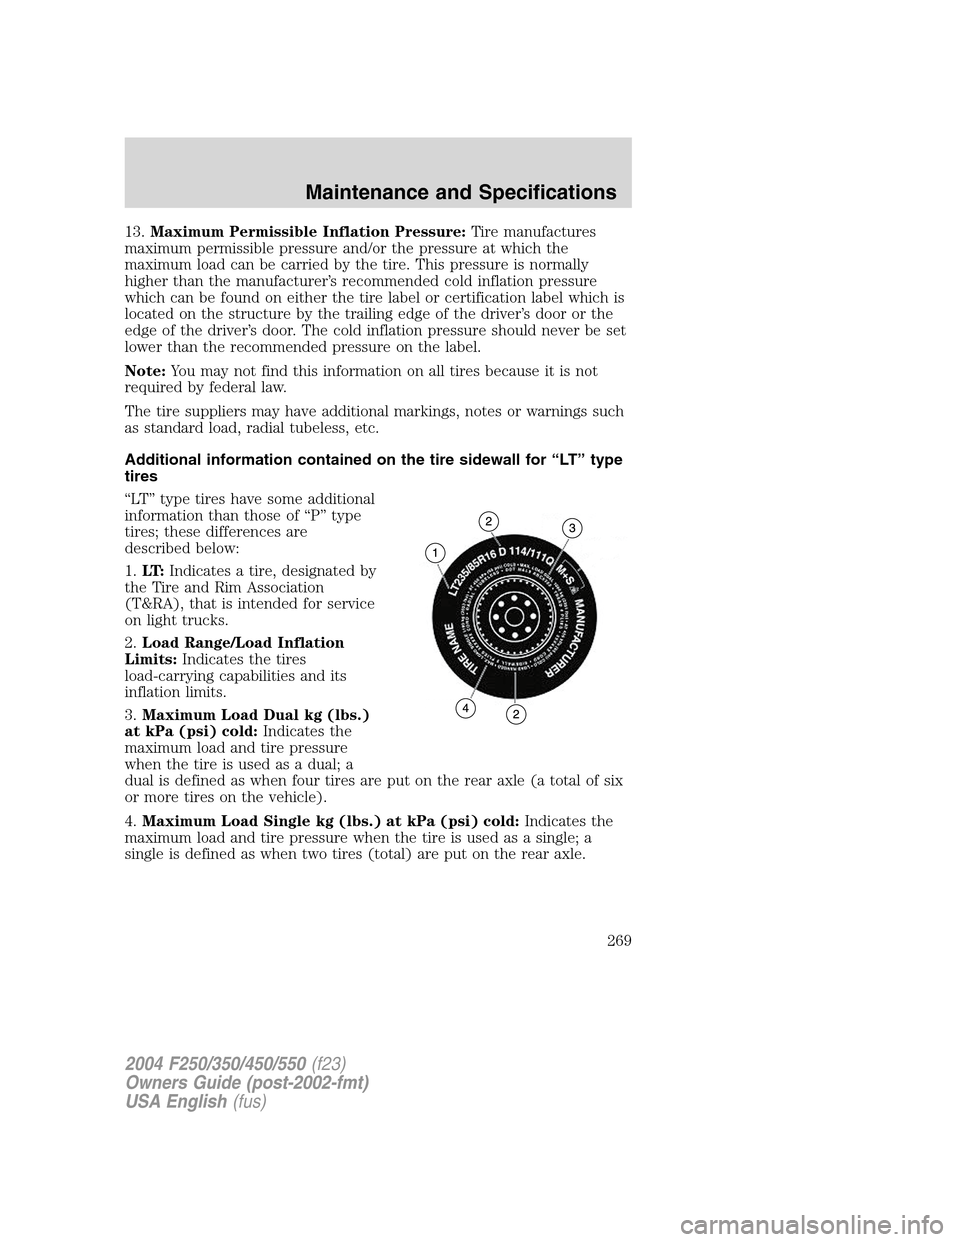 FORD SUPER DUTY 2004 1.G User Guide 13.Maximum Permissible Inflation Pressure:Tire manufactures
maximum permissible pressure and/or the pressure at which the
maximum load can be carried by the tire. This pressure is normally
higher than